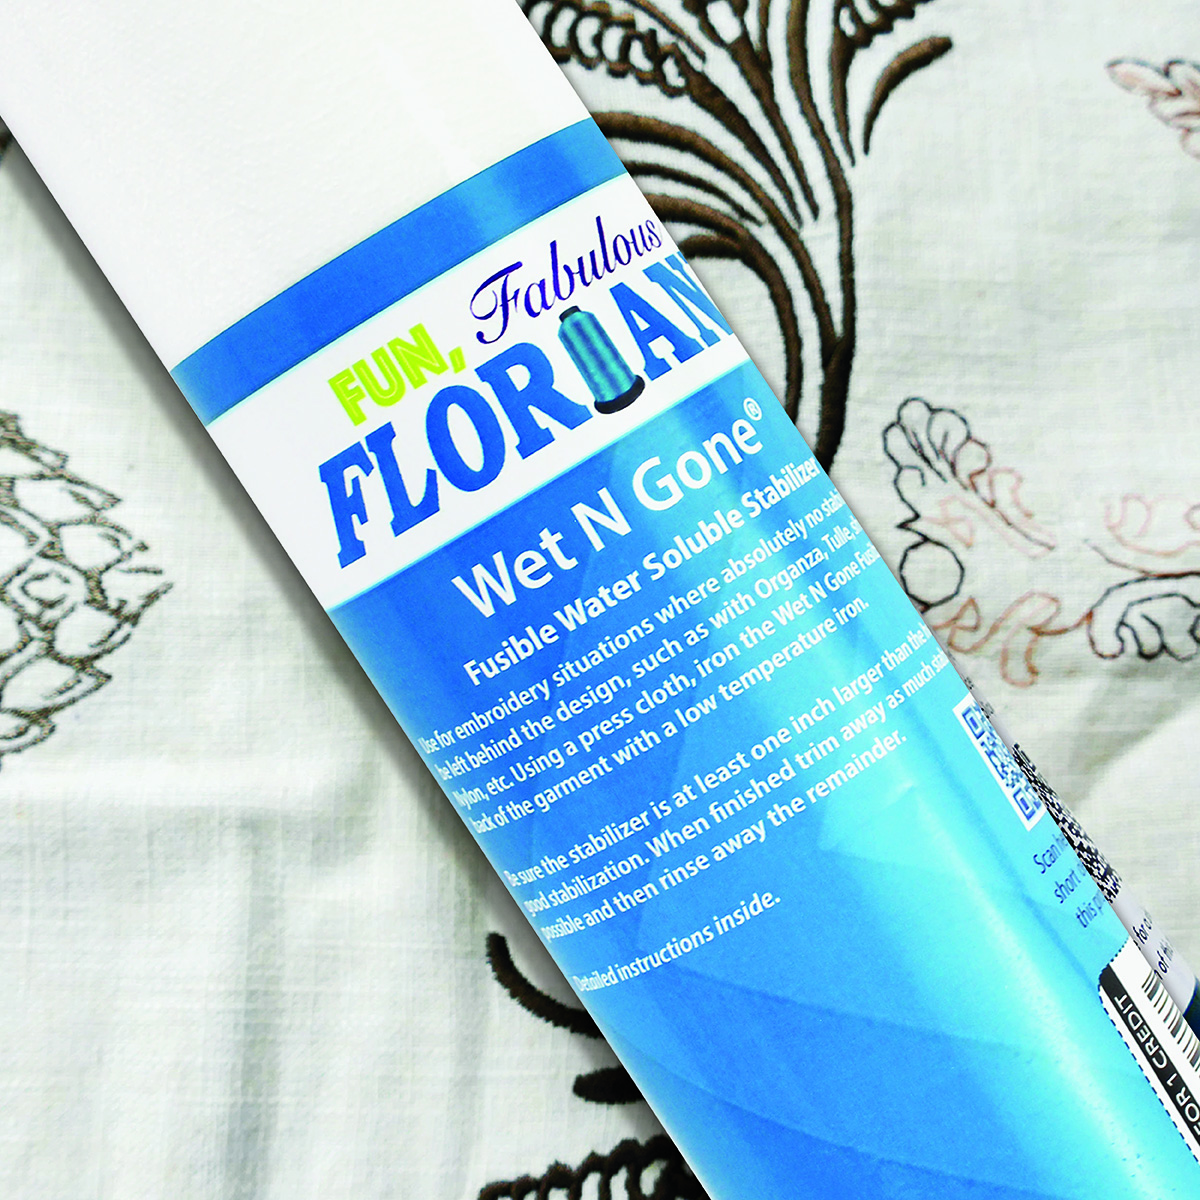 Water Soluble Topping - Floriani